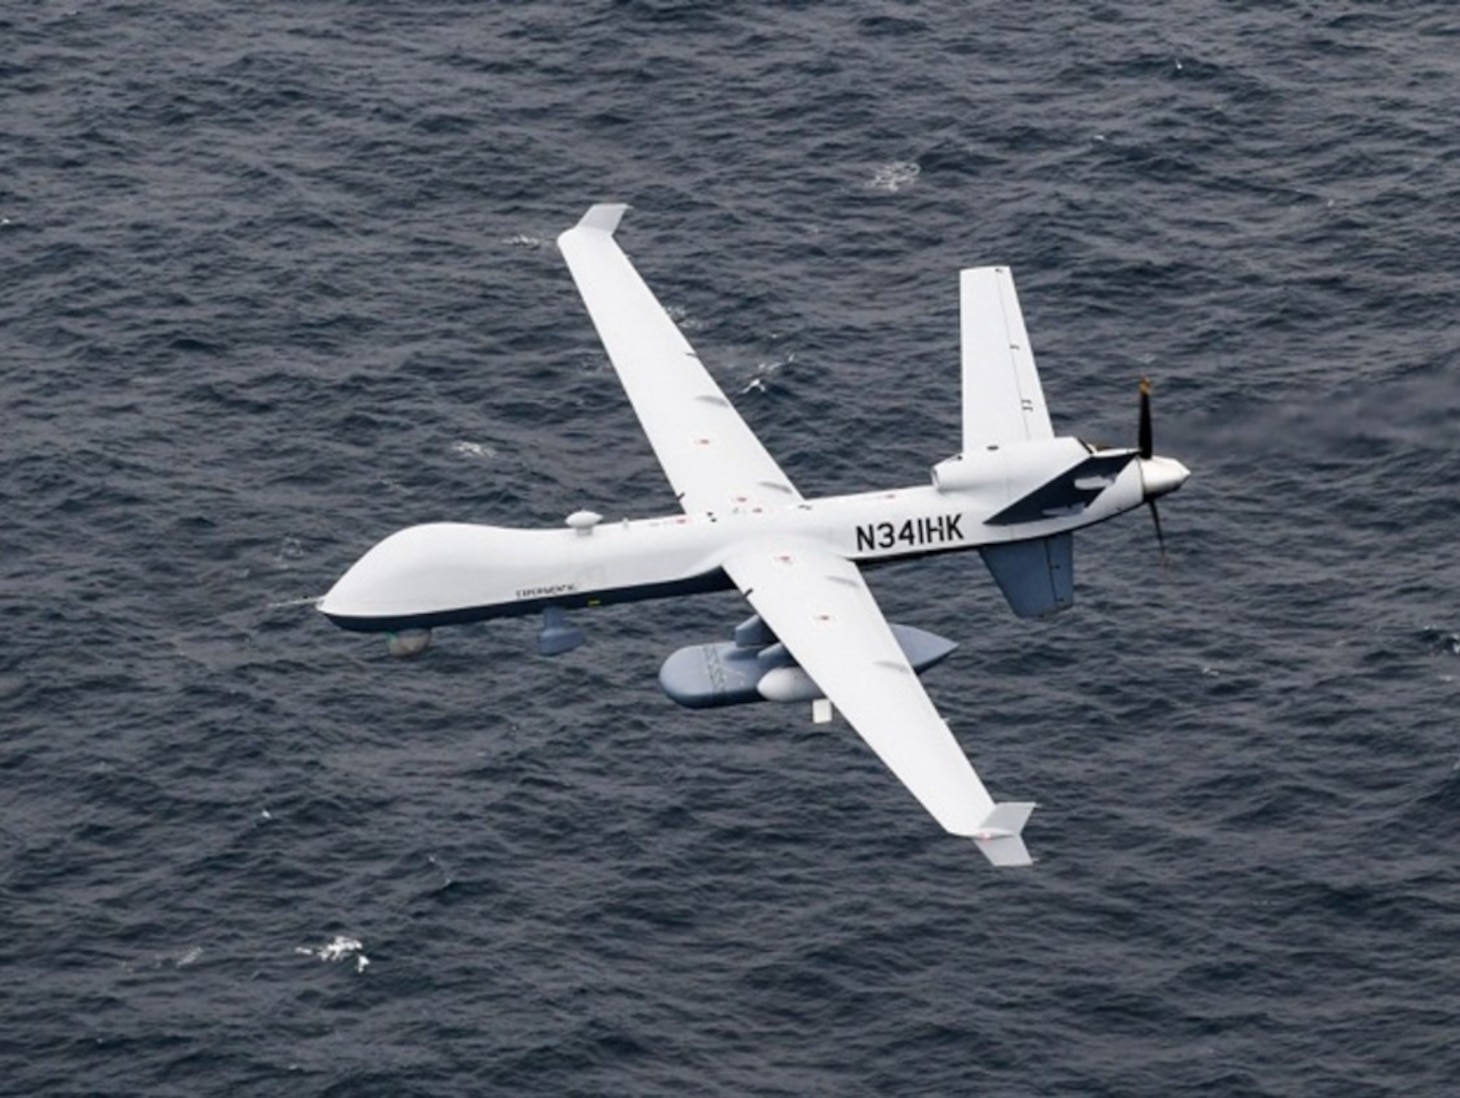 An MQ-9 Sea Guardian unmanned maritime surveillance aircraft system flies over the Pacific Ocean during U.S. Pacific Fleet’s Unmanned Systems Integrated Battle Problem (UxS IBP) 21, April 21. UxS IBP 21 integrates manned and unmanned capabilities into challenging operational scenarios to generate warfighting advantages.